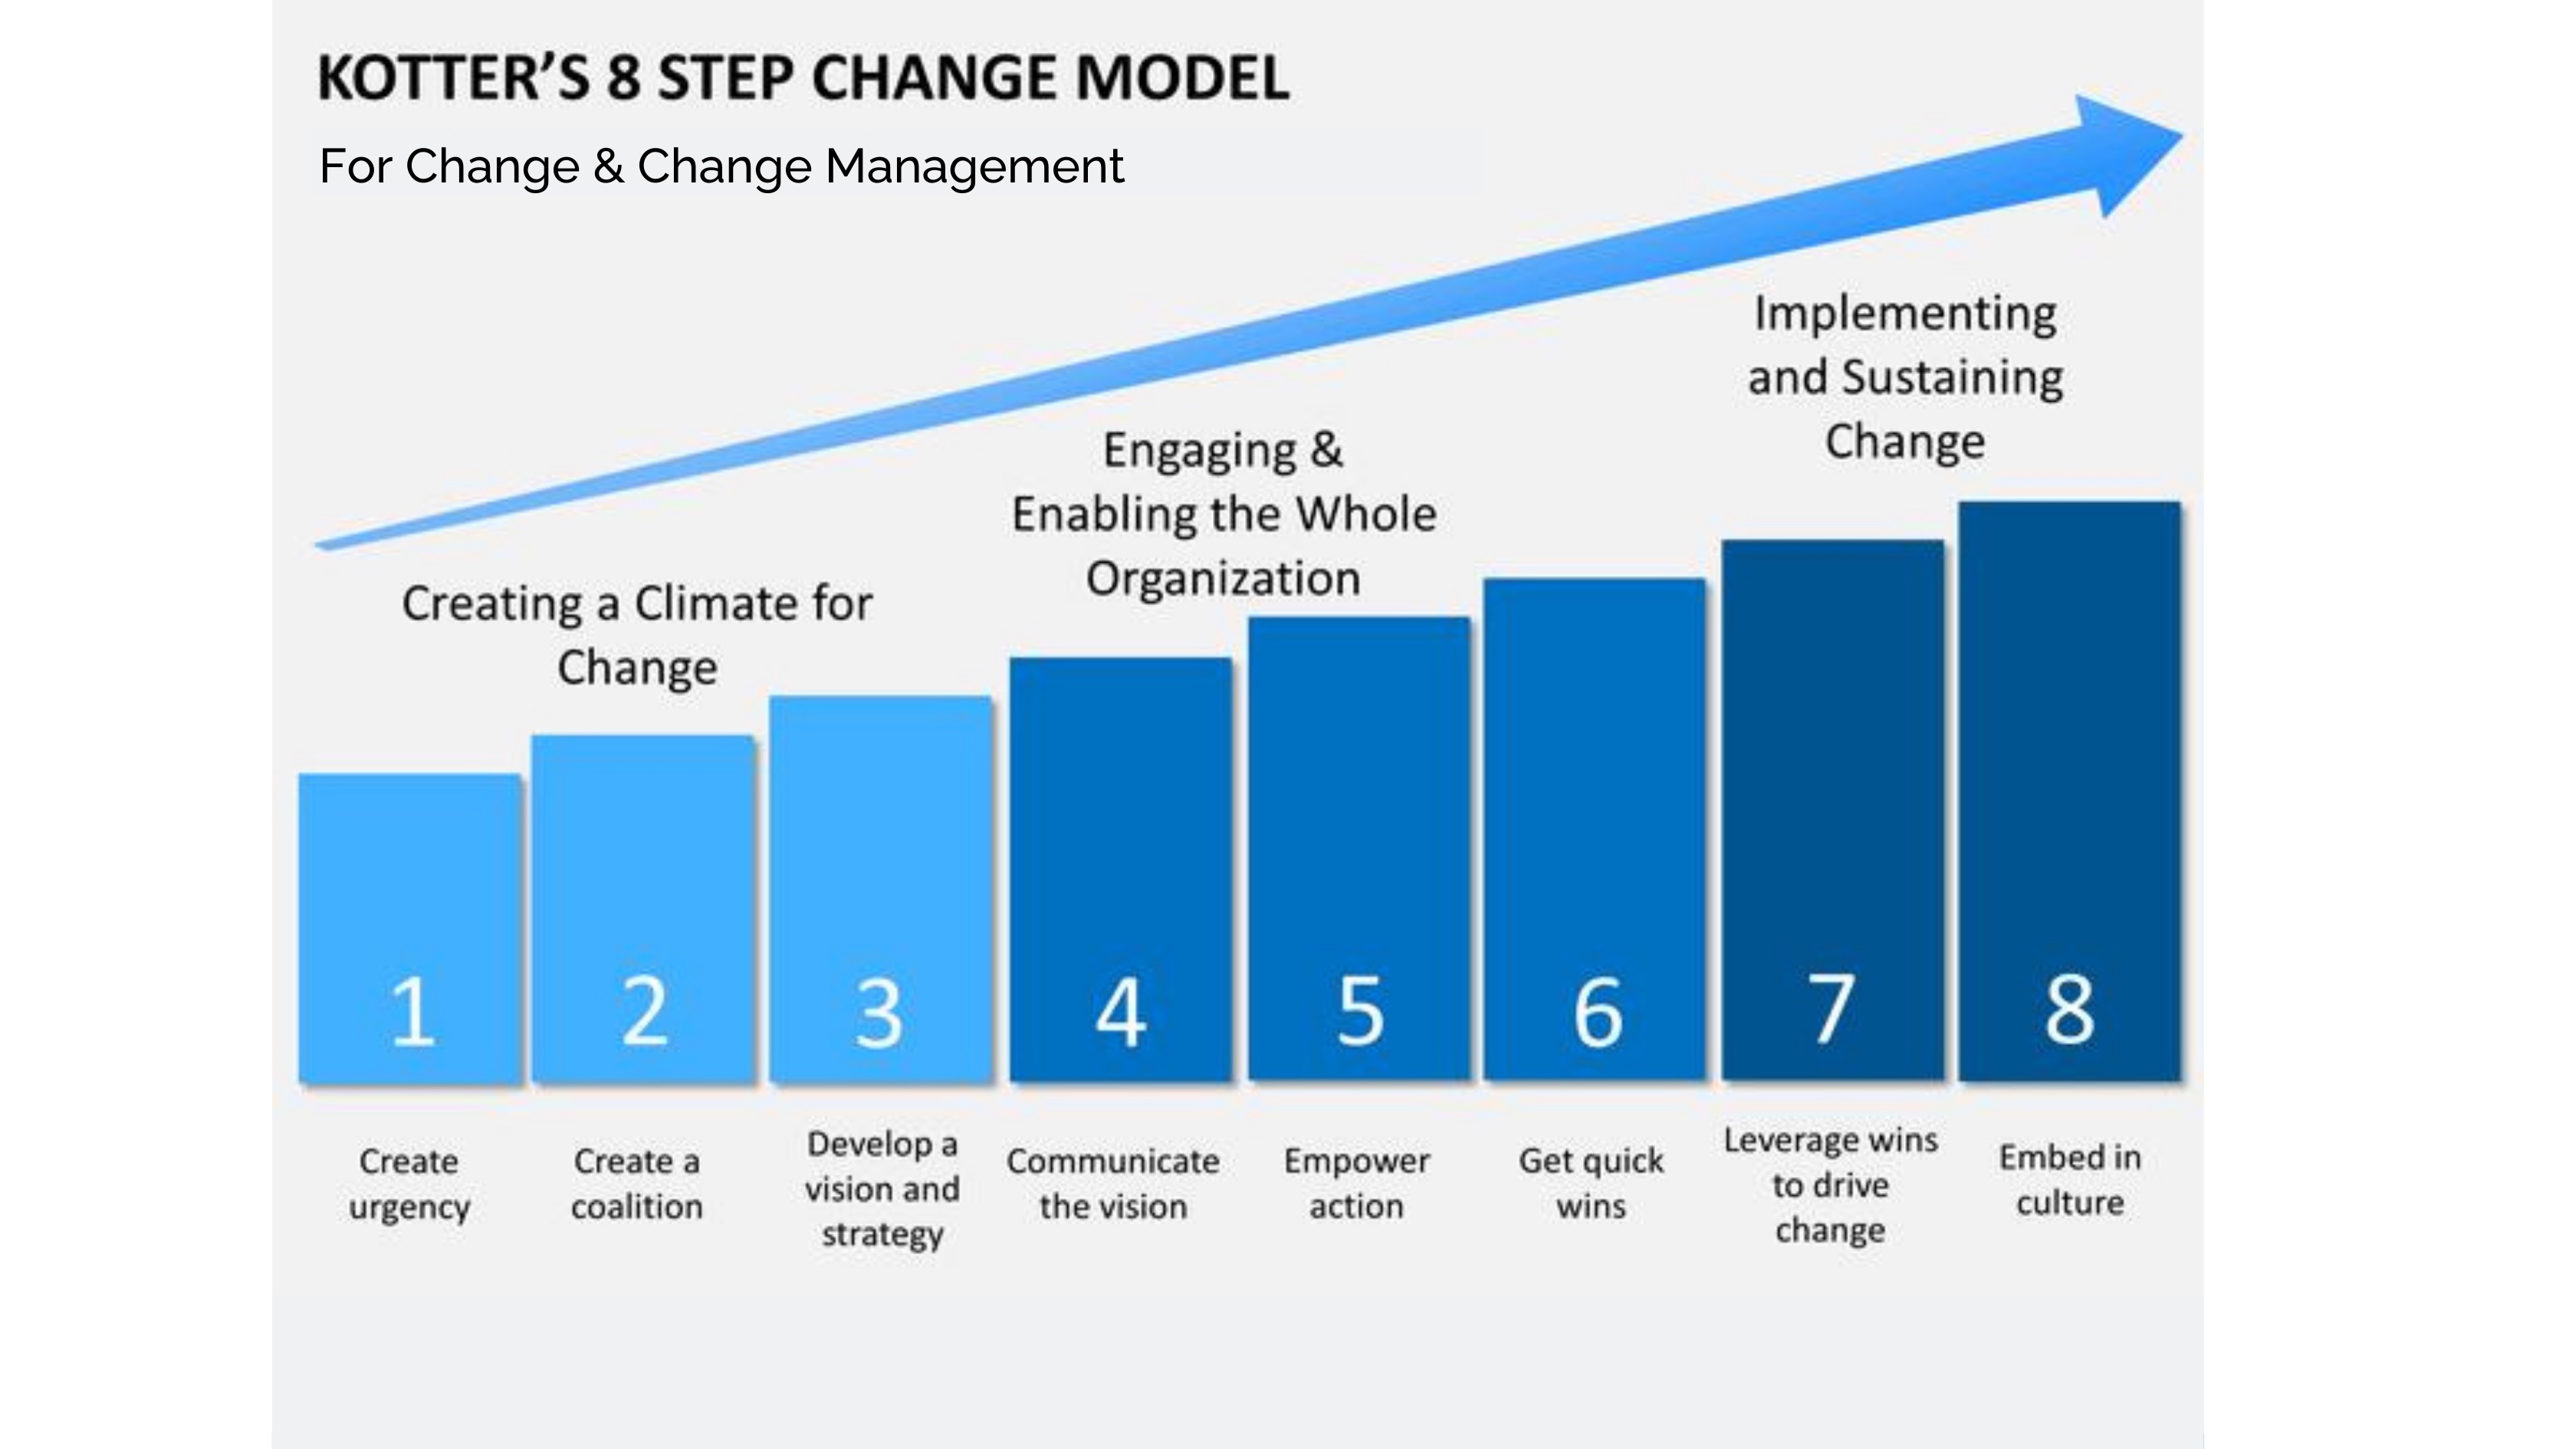 Kotter's eight-step change model for change and change management.